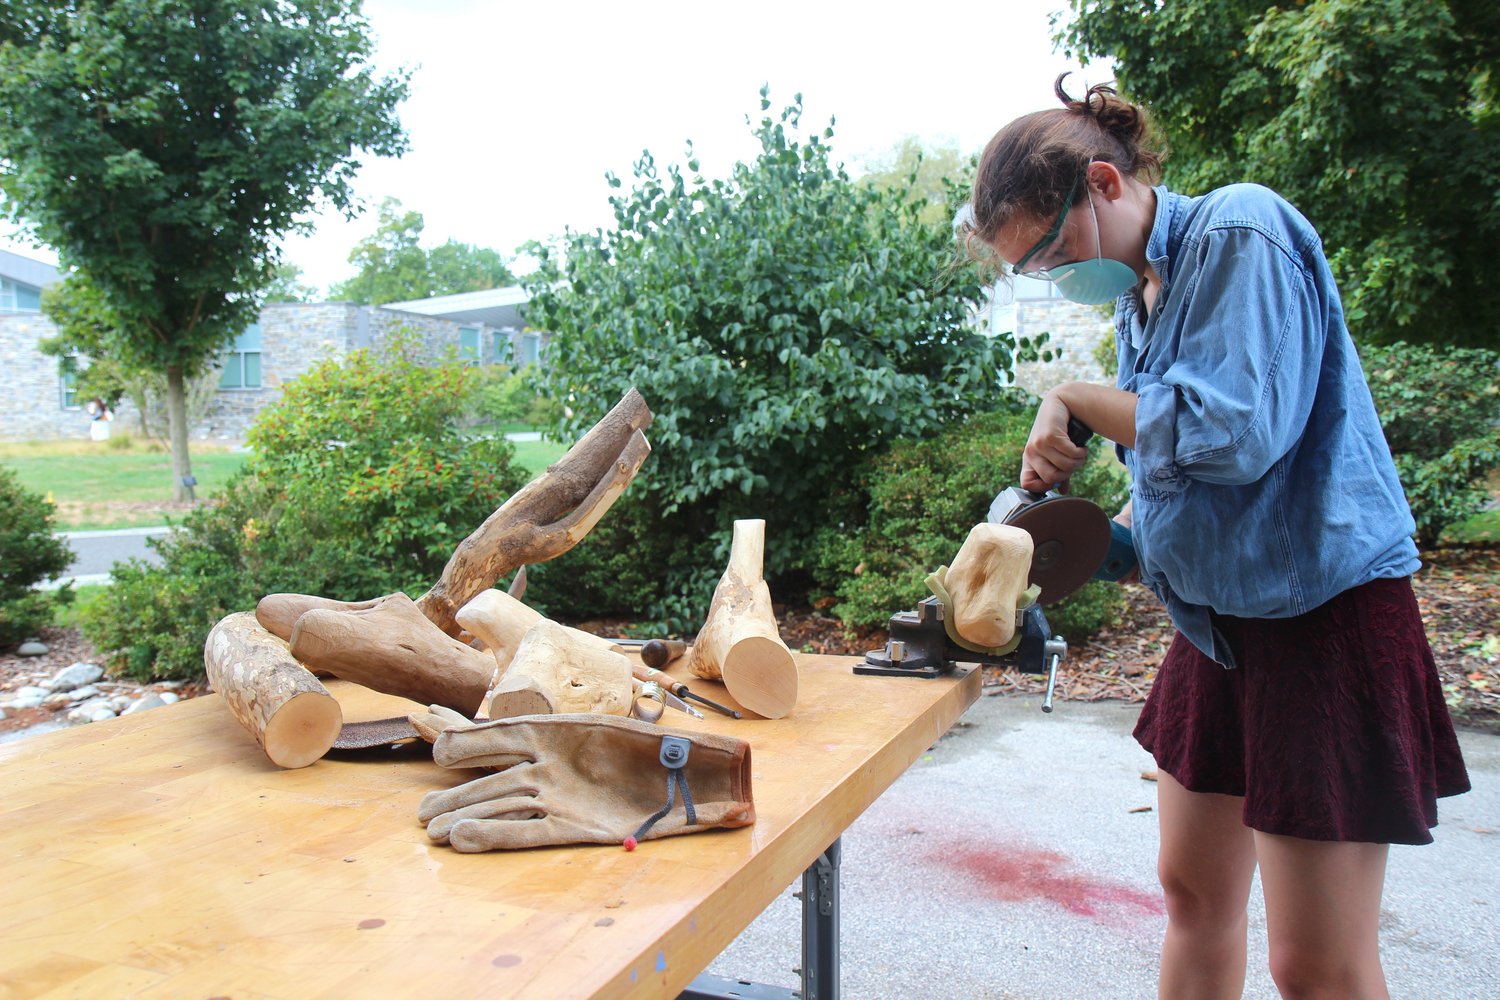 Sculpture student carving outdoors.